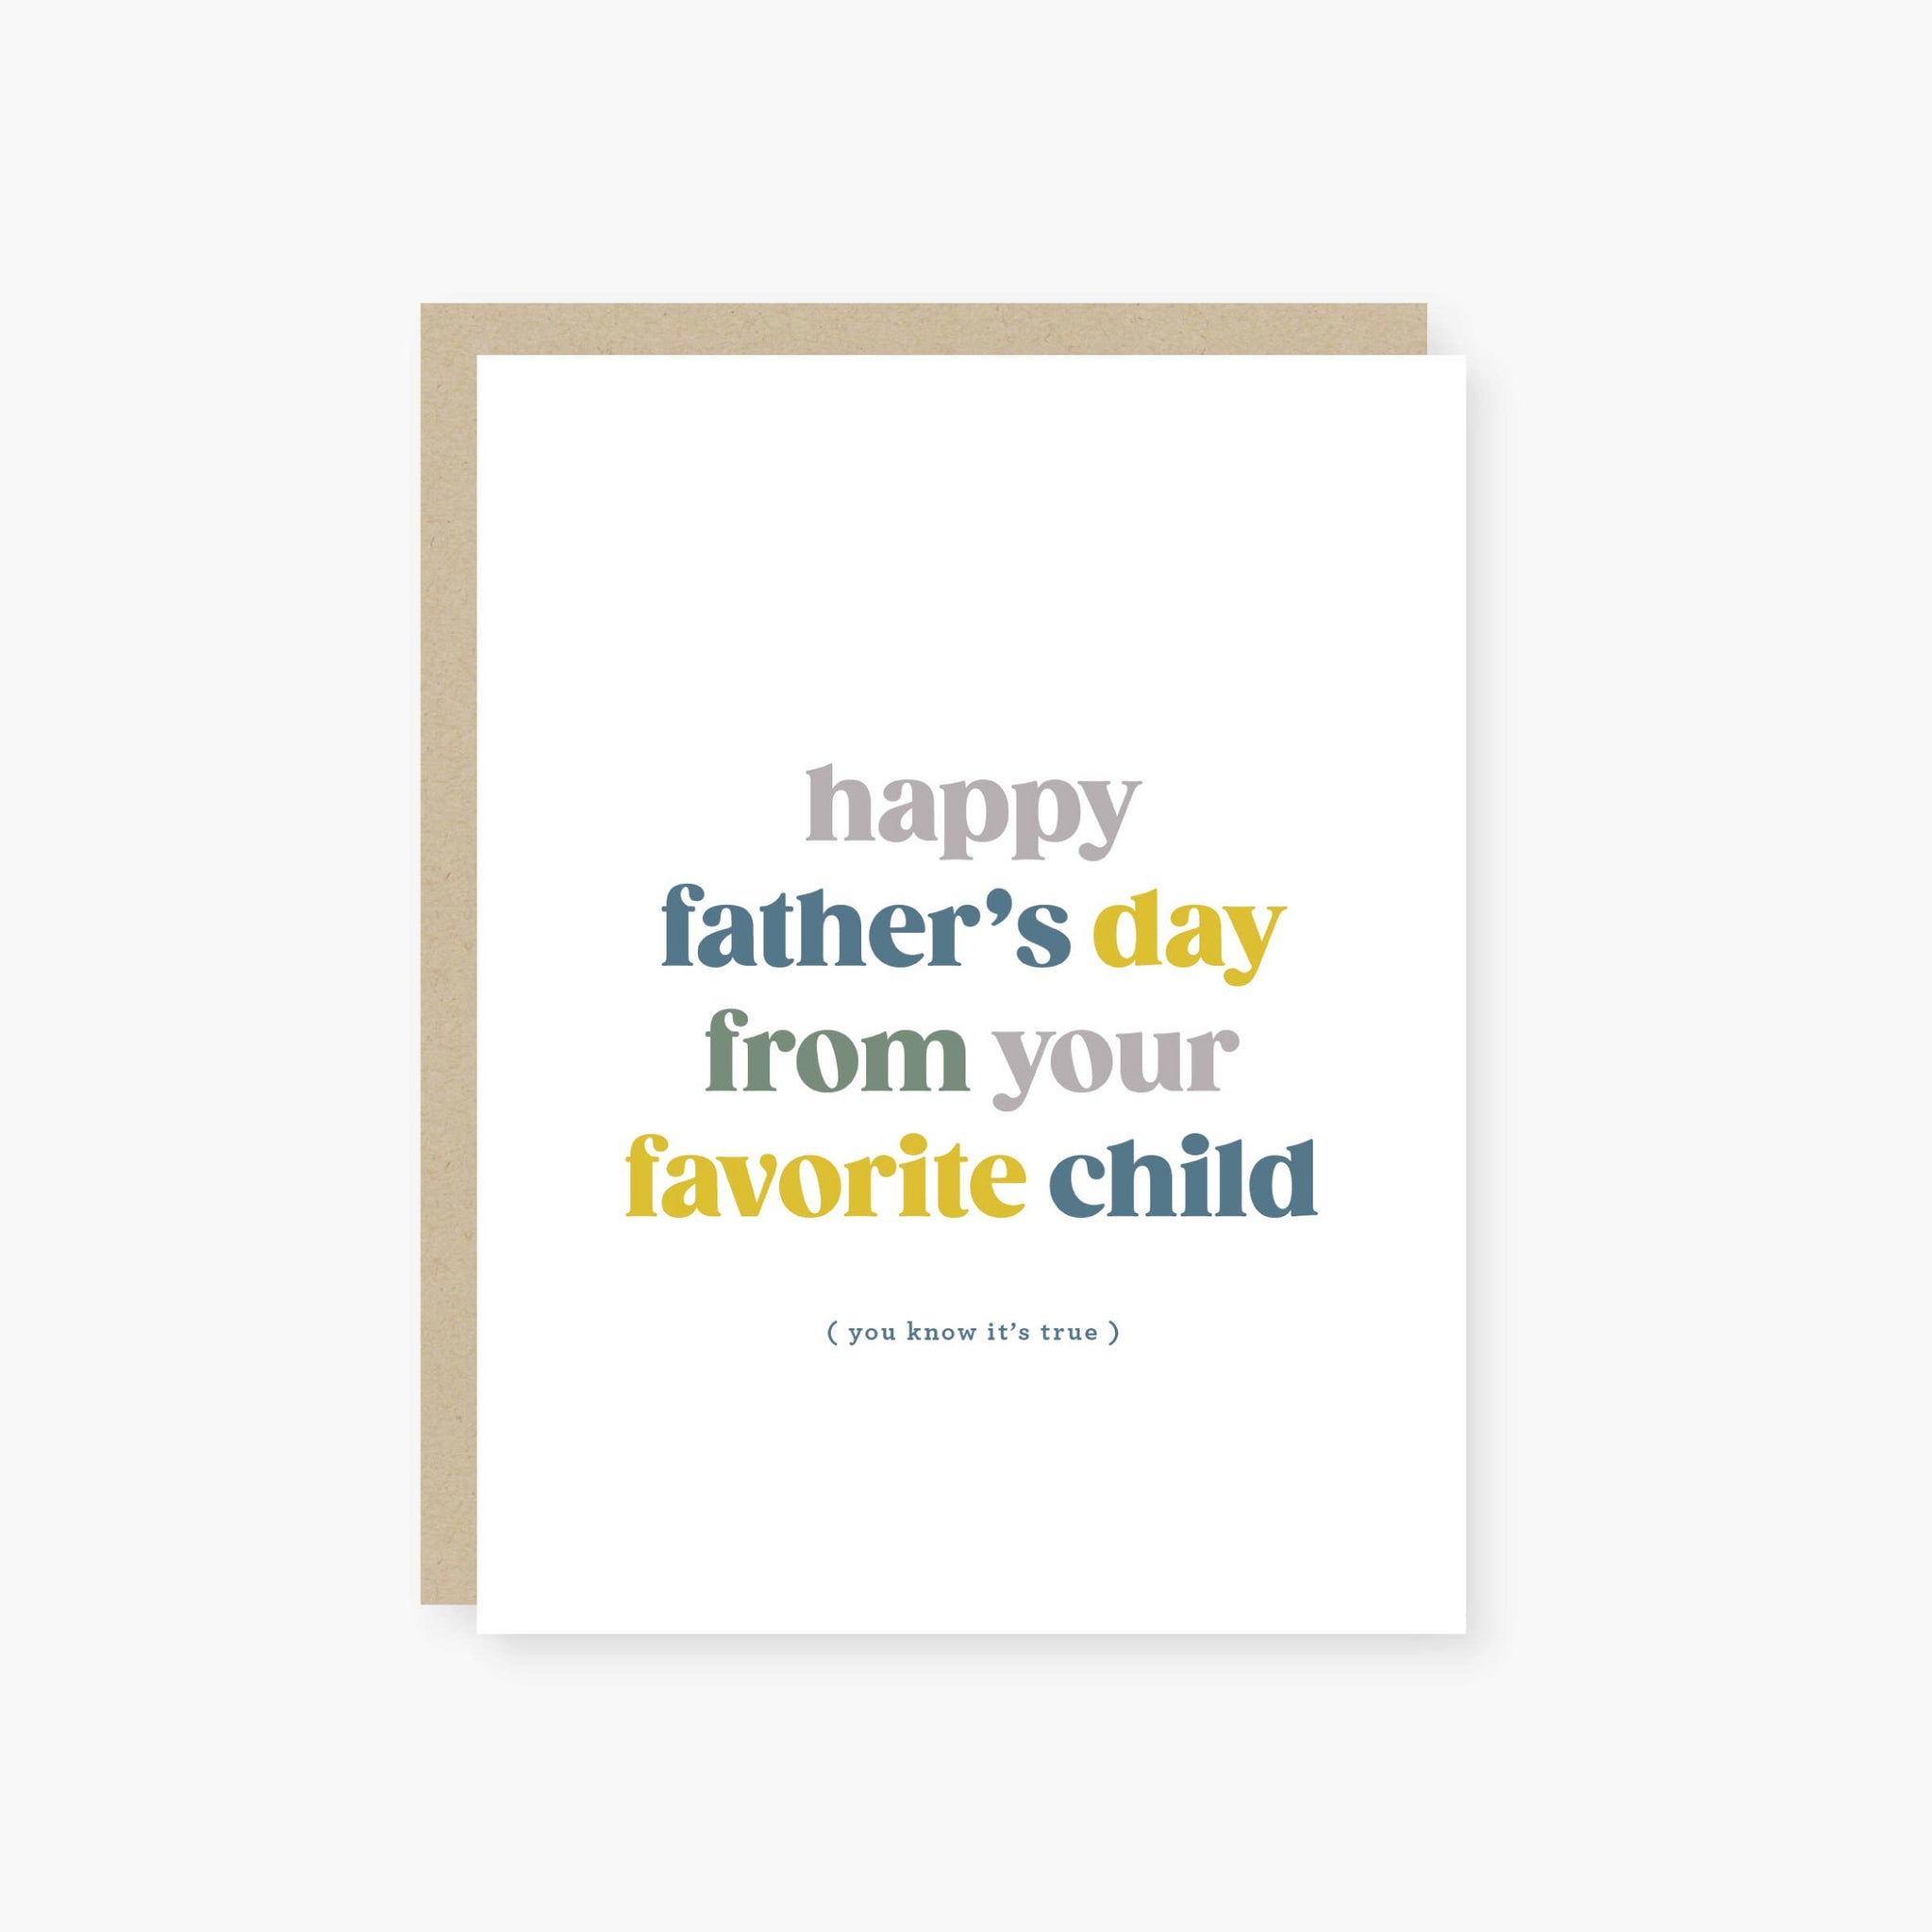 your favorite child father's day card